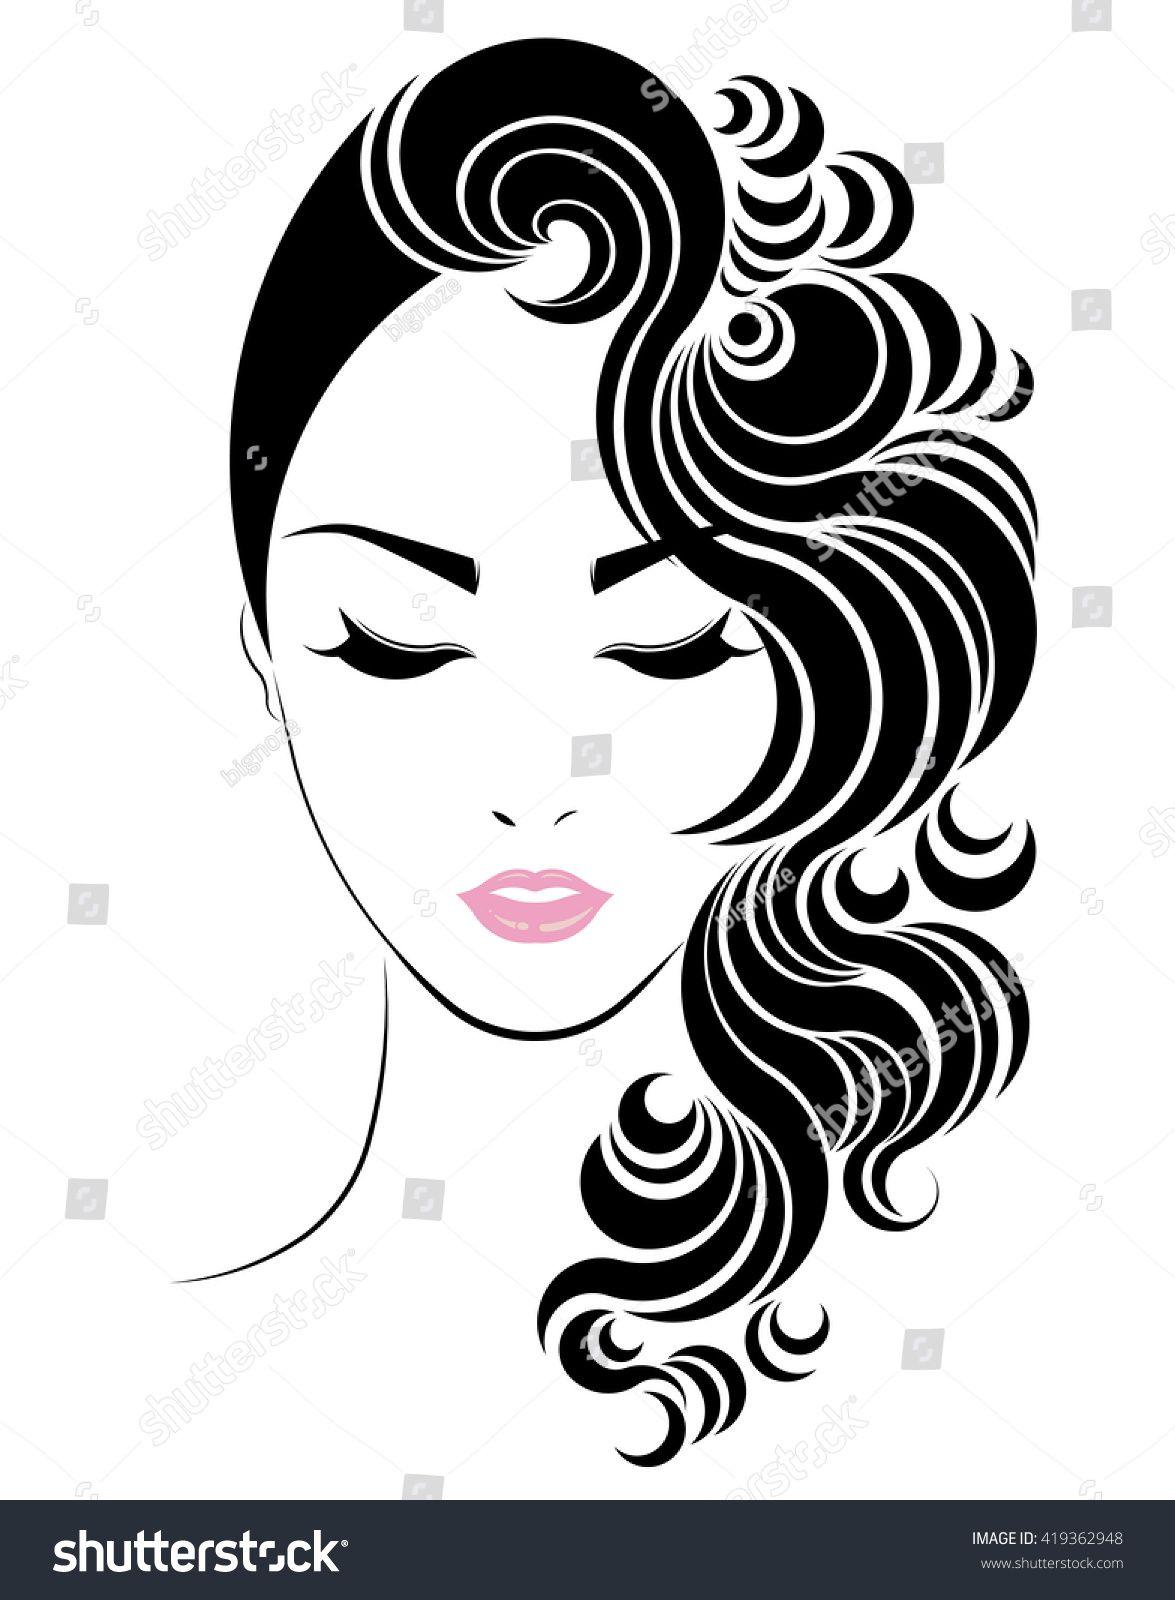 Women with Long Flowing Hair Logo - Long hair style icon, logo women face on white background, vector ...